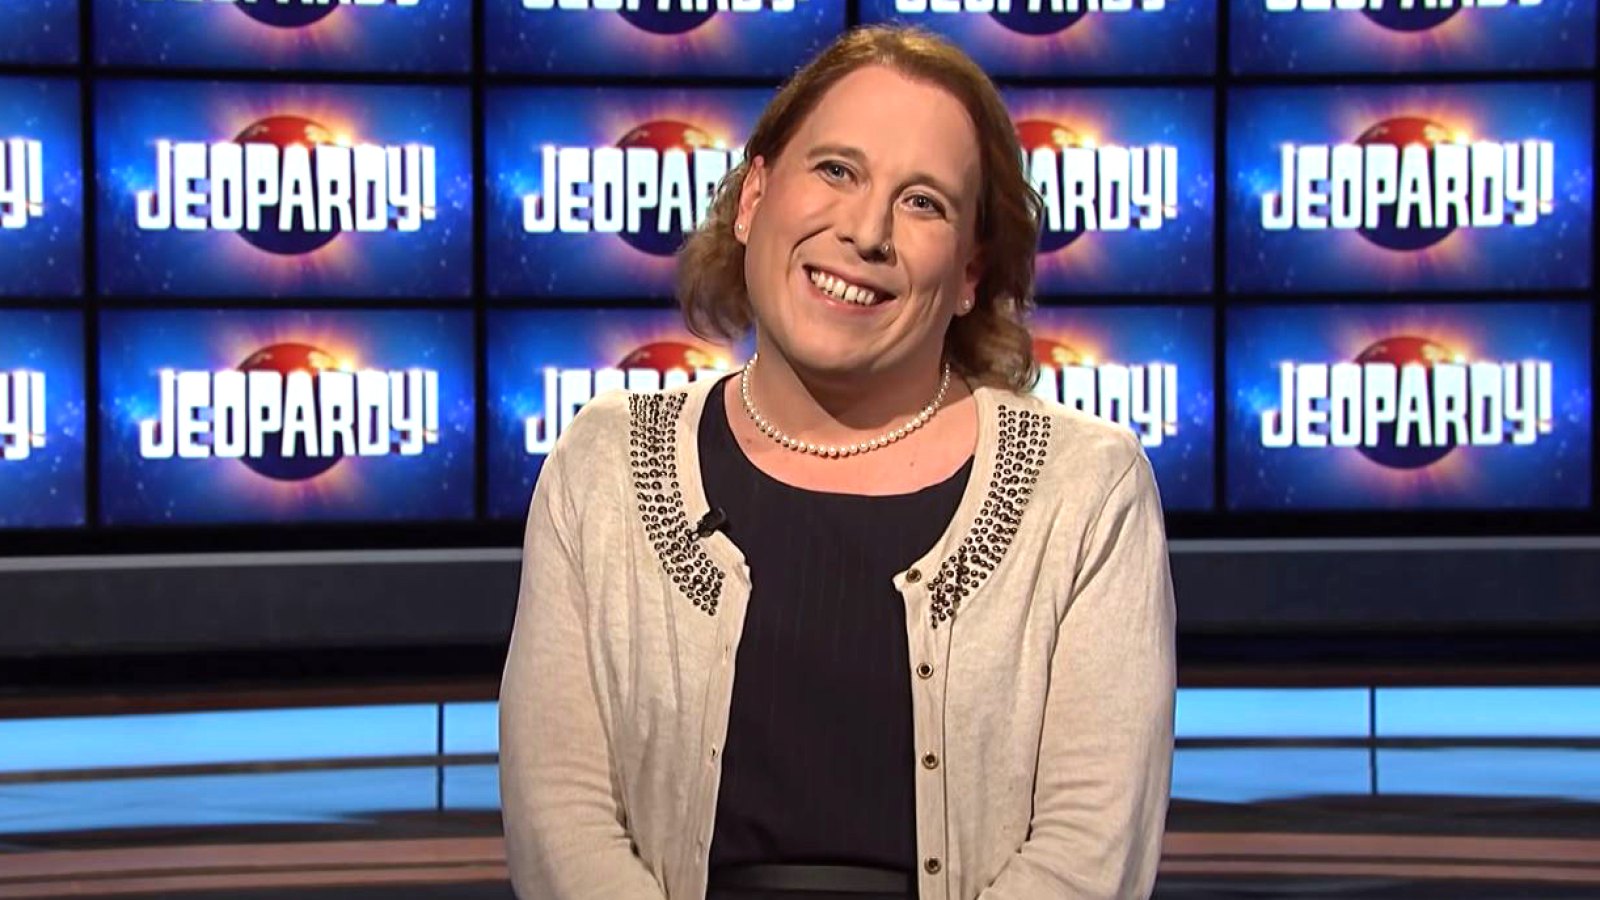 Jeopardy's Amy Schneider Earns More Than $1 Million Joining Ken Jennings in Millionaire's Circle